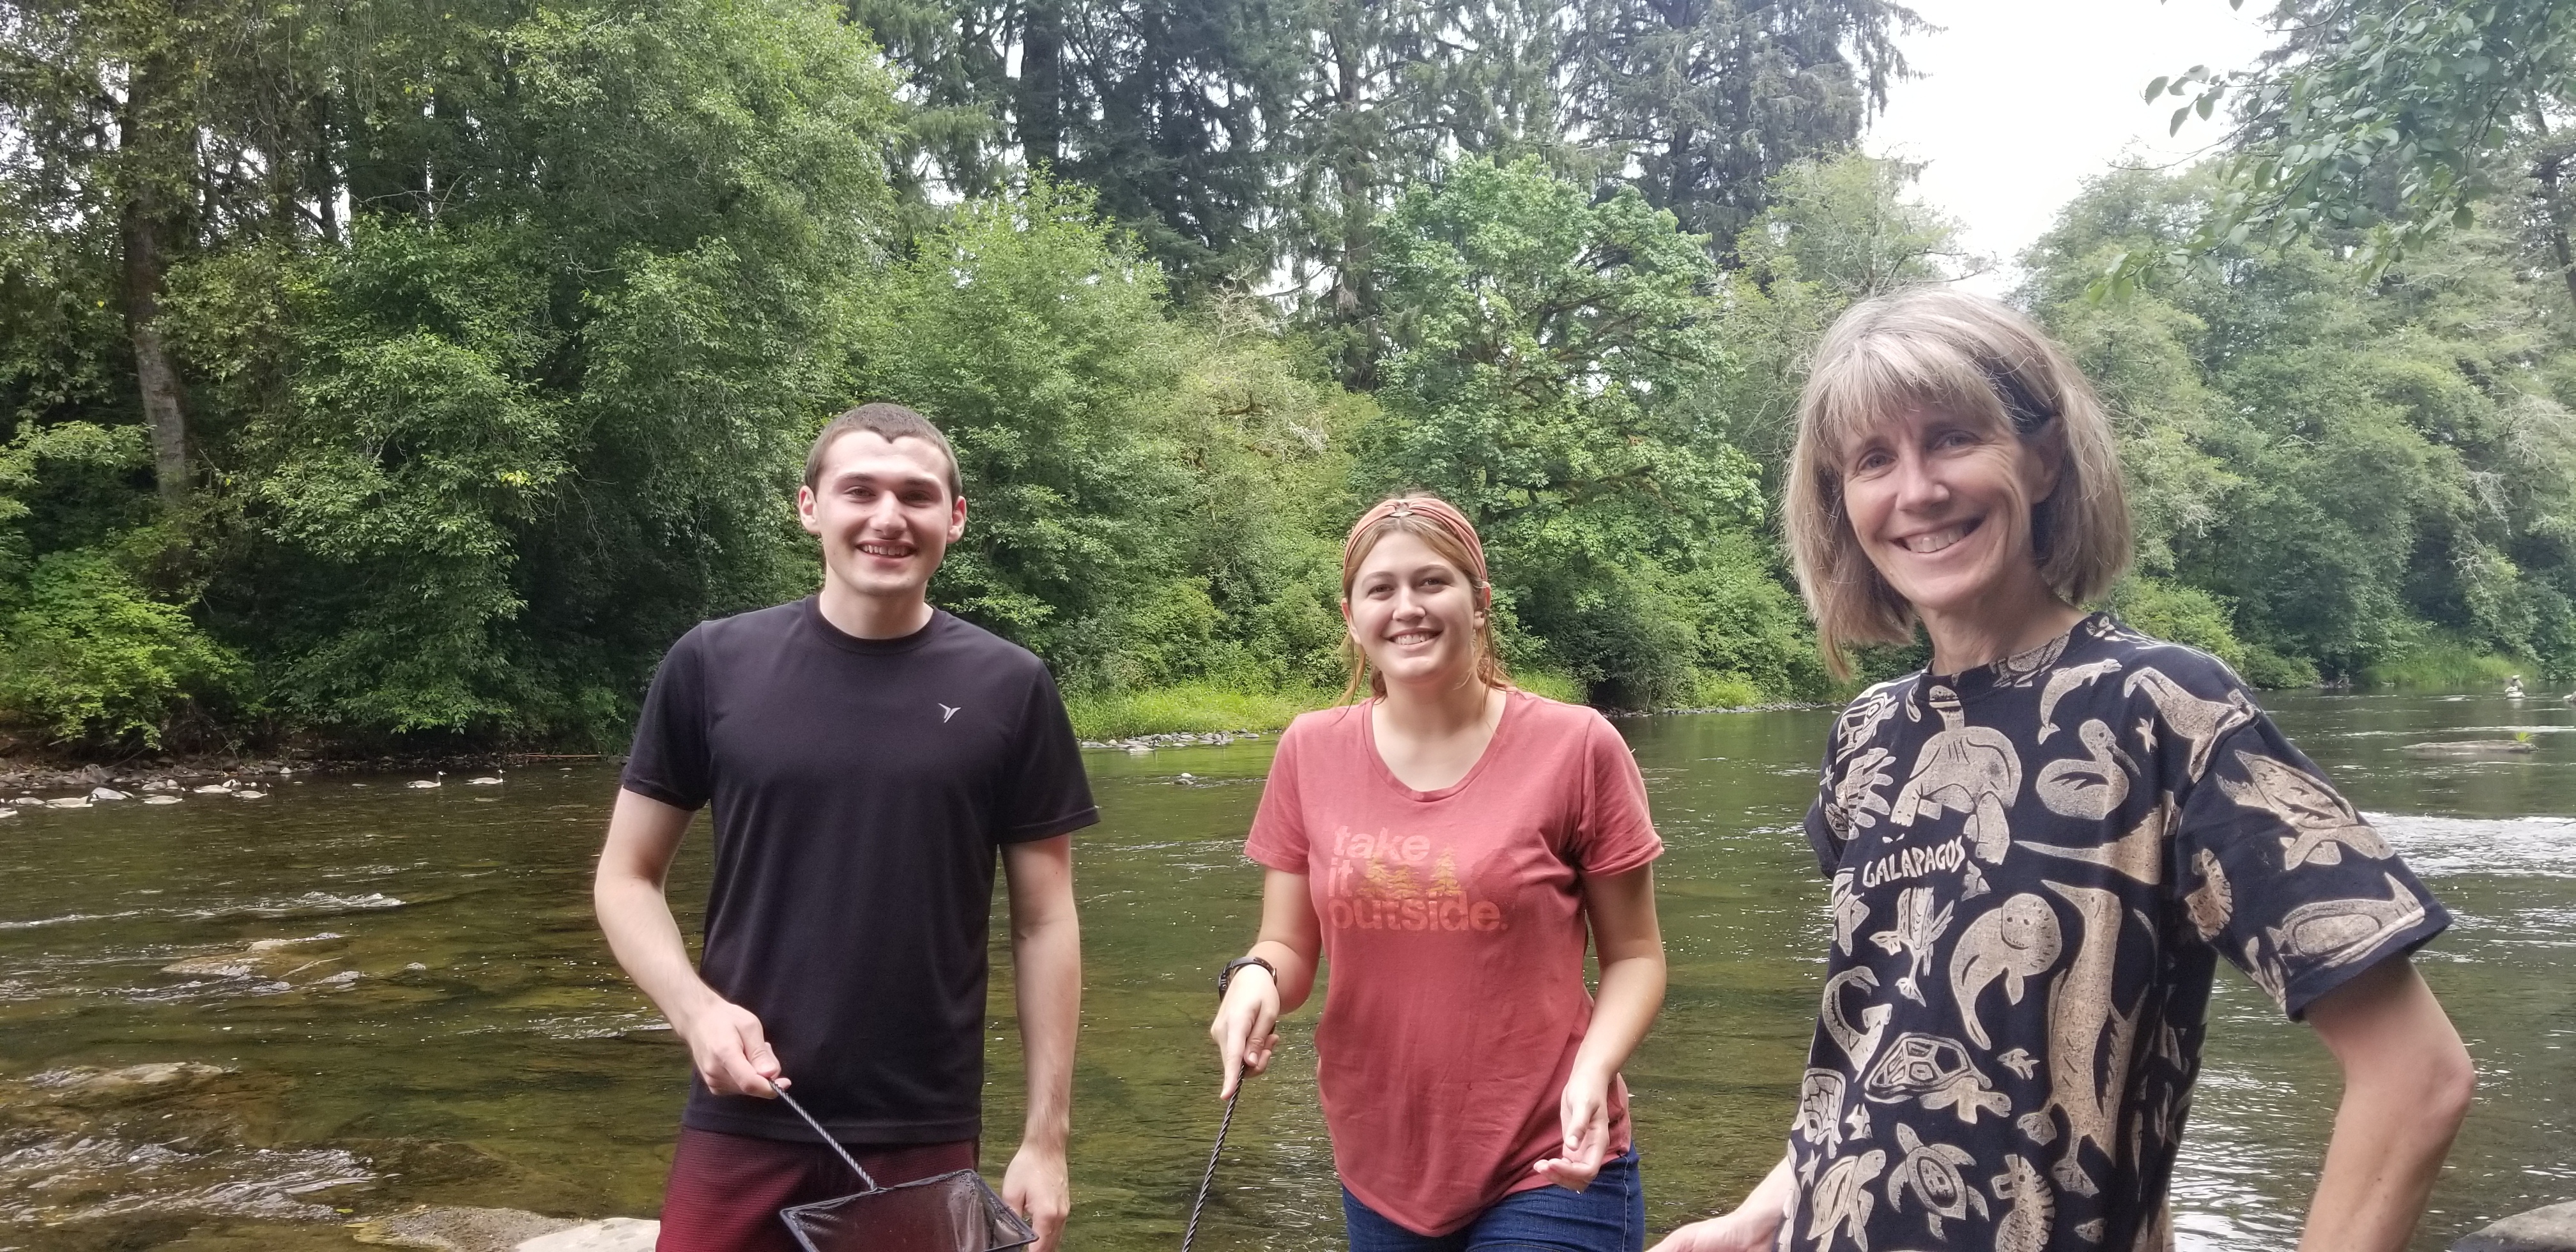 2018 NOAA Hollings scholar Mark DeSimone (left), 2018 NOAA EPP/MSI undergraduate scholar Delaena Stephens (middle), and mentor Kym Jacobson (right) searching for snails in the river to collect their parasites for an educational seminar.